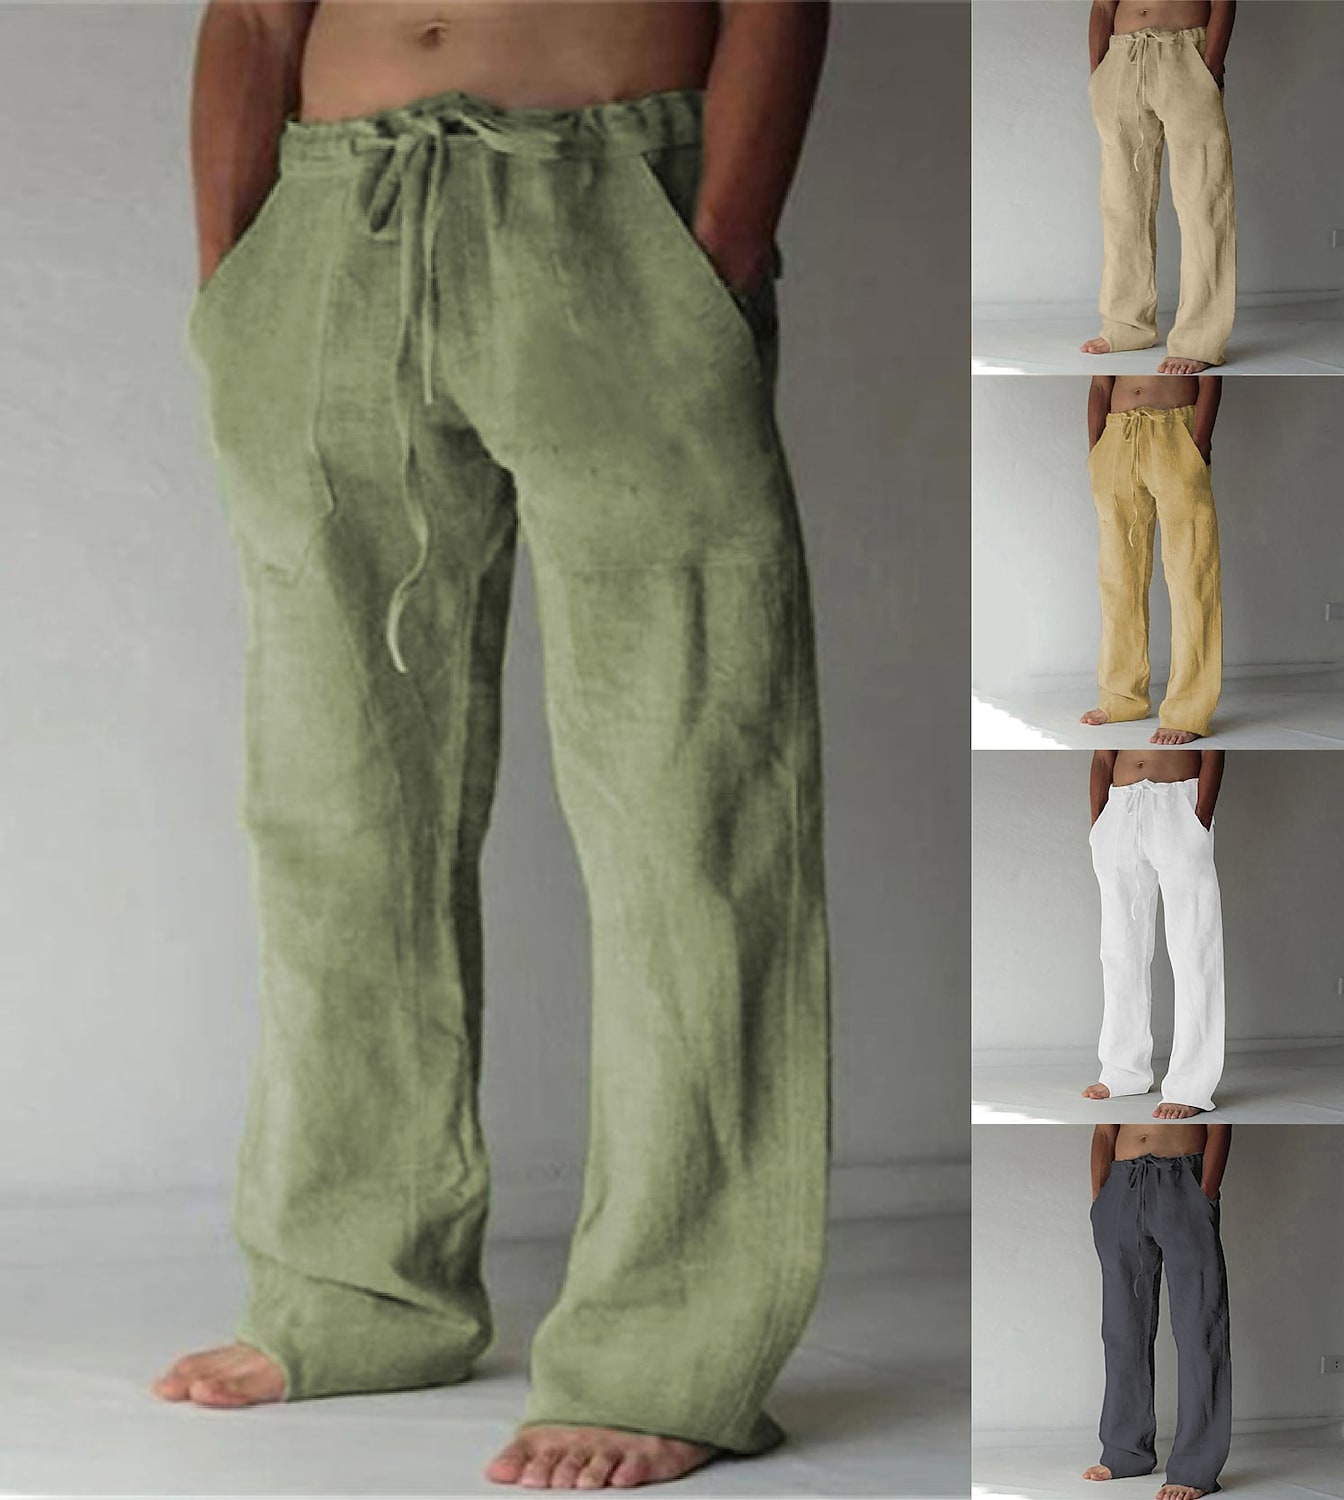 Men's Linen Solid Color with Pocket Straight-Leg Beach Trousers